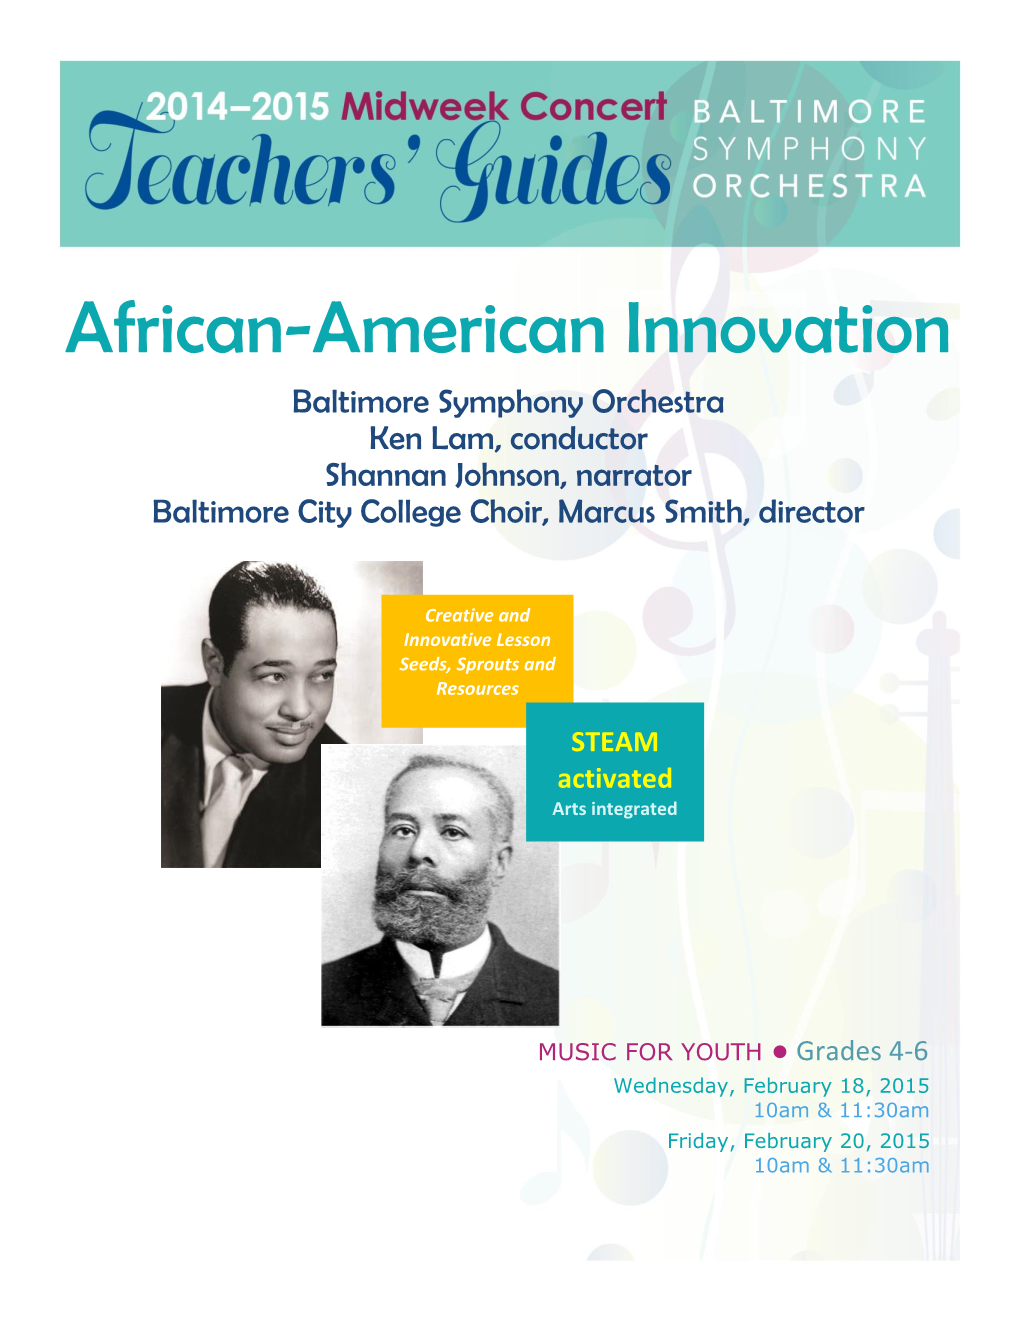 African-American Innovation Baltimore Symphony Orchestra Ken Lam, Conductor